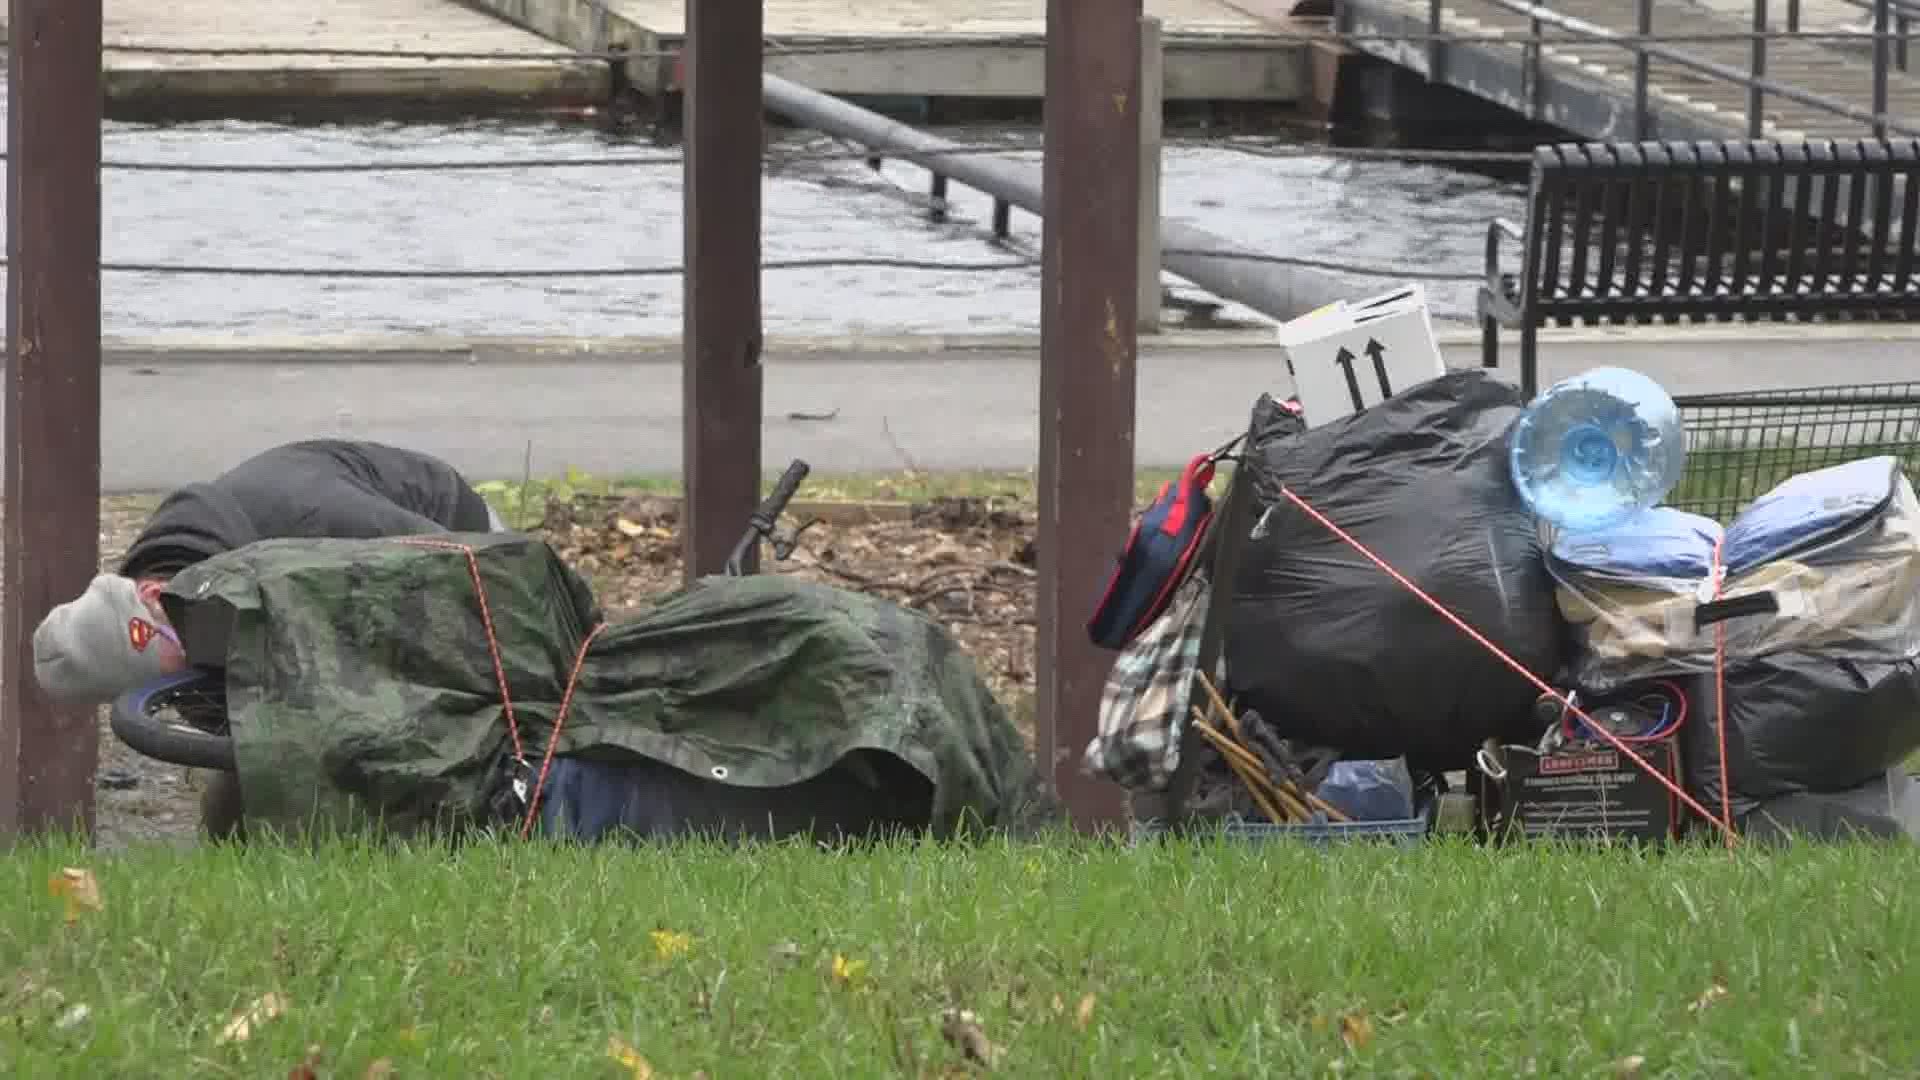 Bangor officials made good on their promise to clear out the homeless encampment on the city's waterfront.